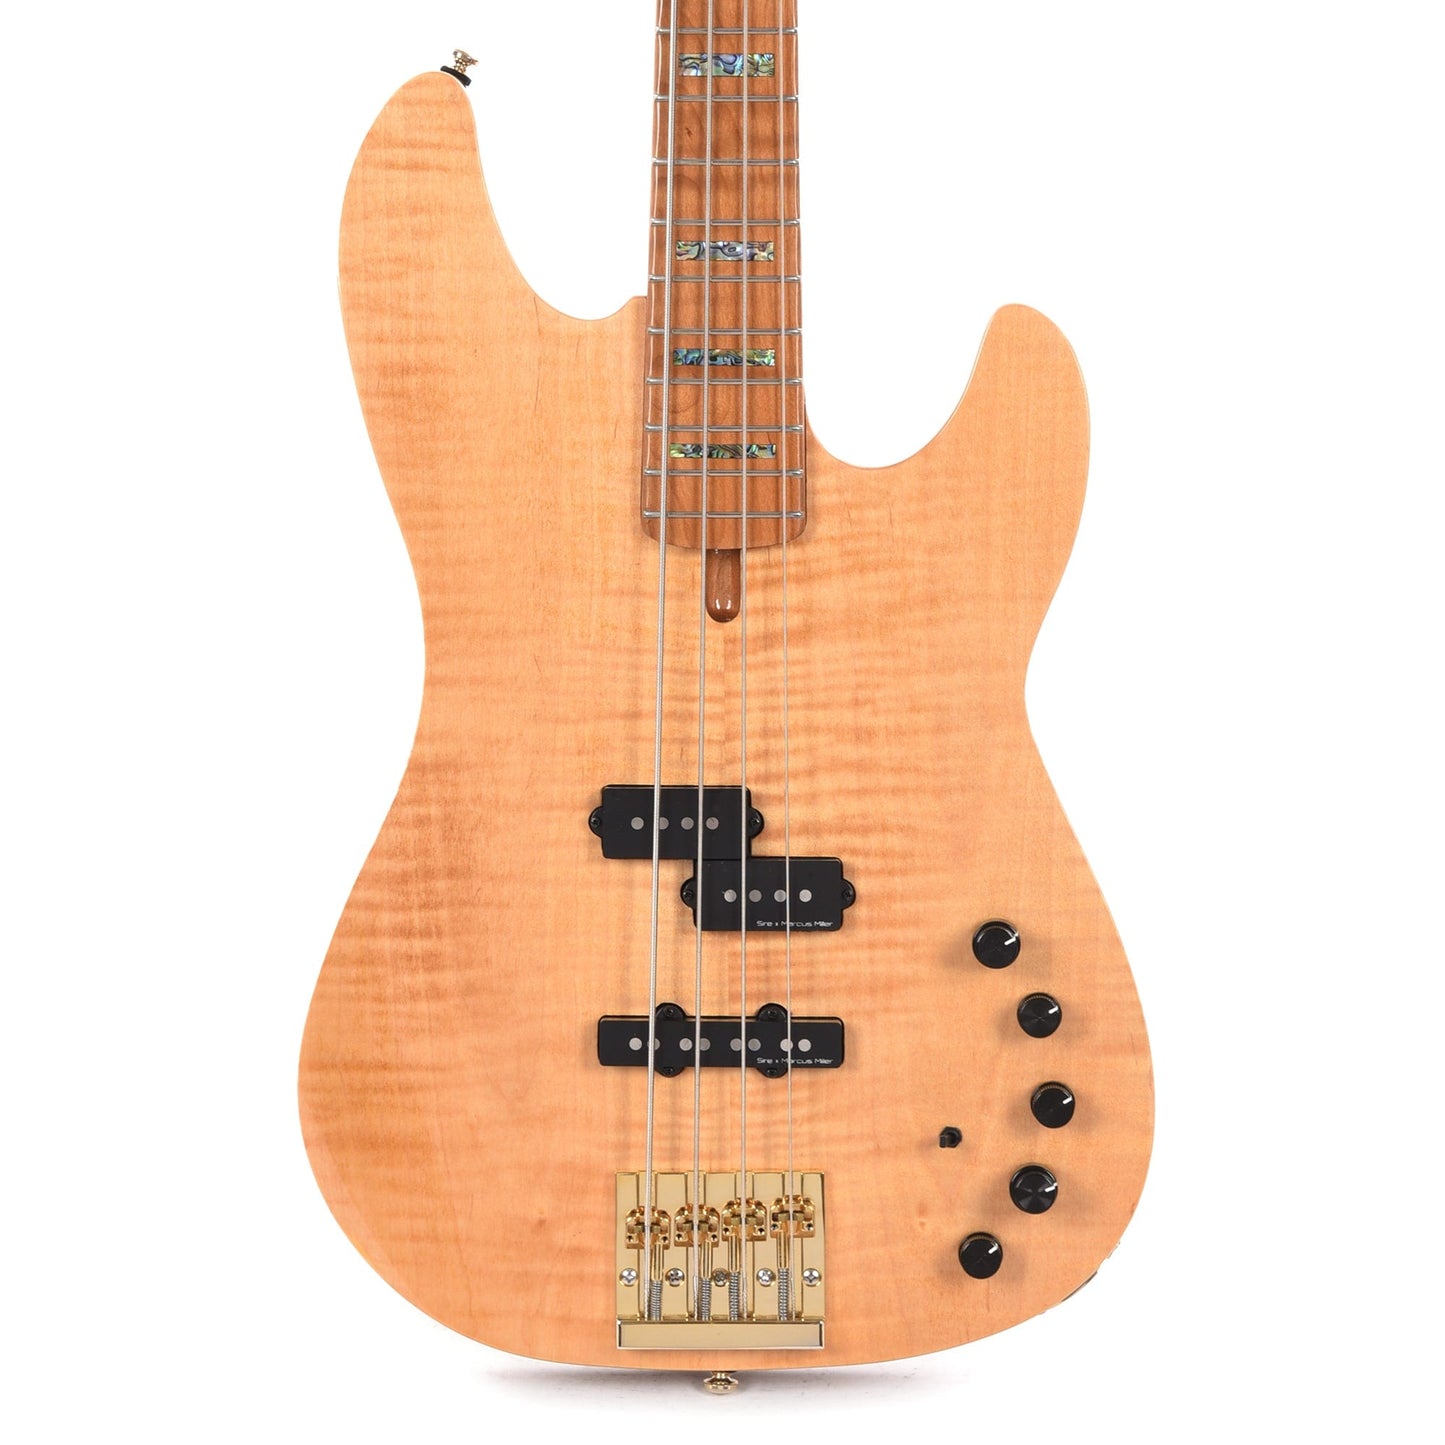 Sire Marcus Miller P10 DX Flame Maple/Alder 4-String Natural Bass Guitars / 4-String